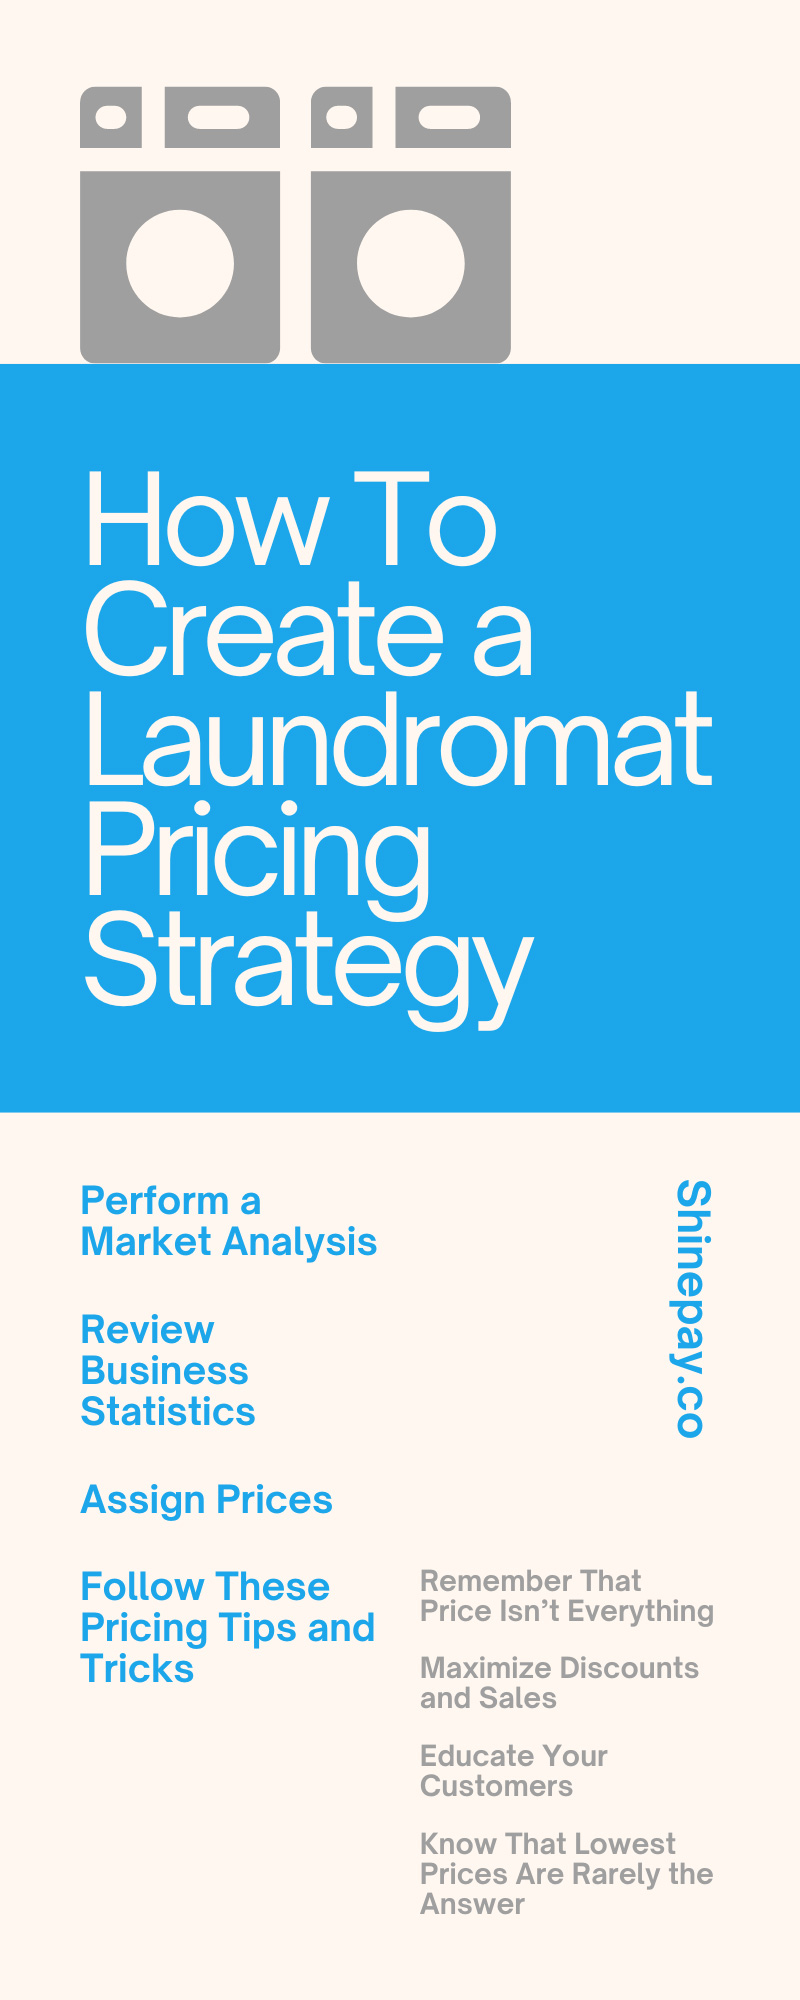 How To Create a Laundromat Pricing Strategy